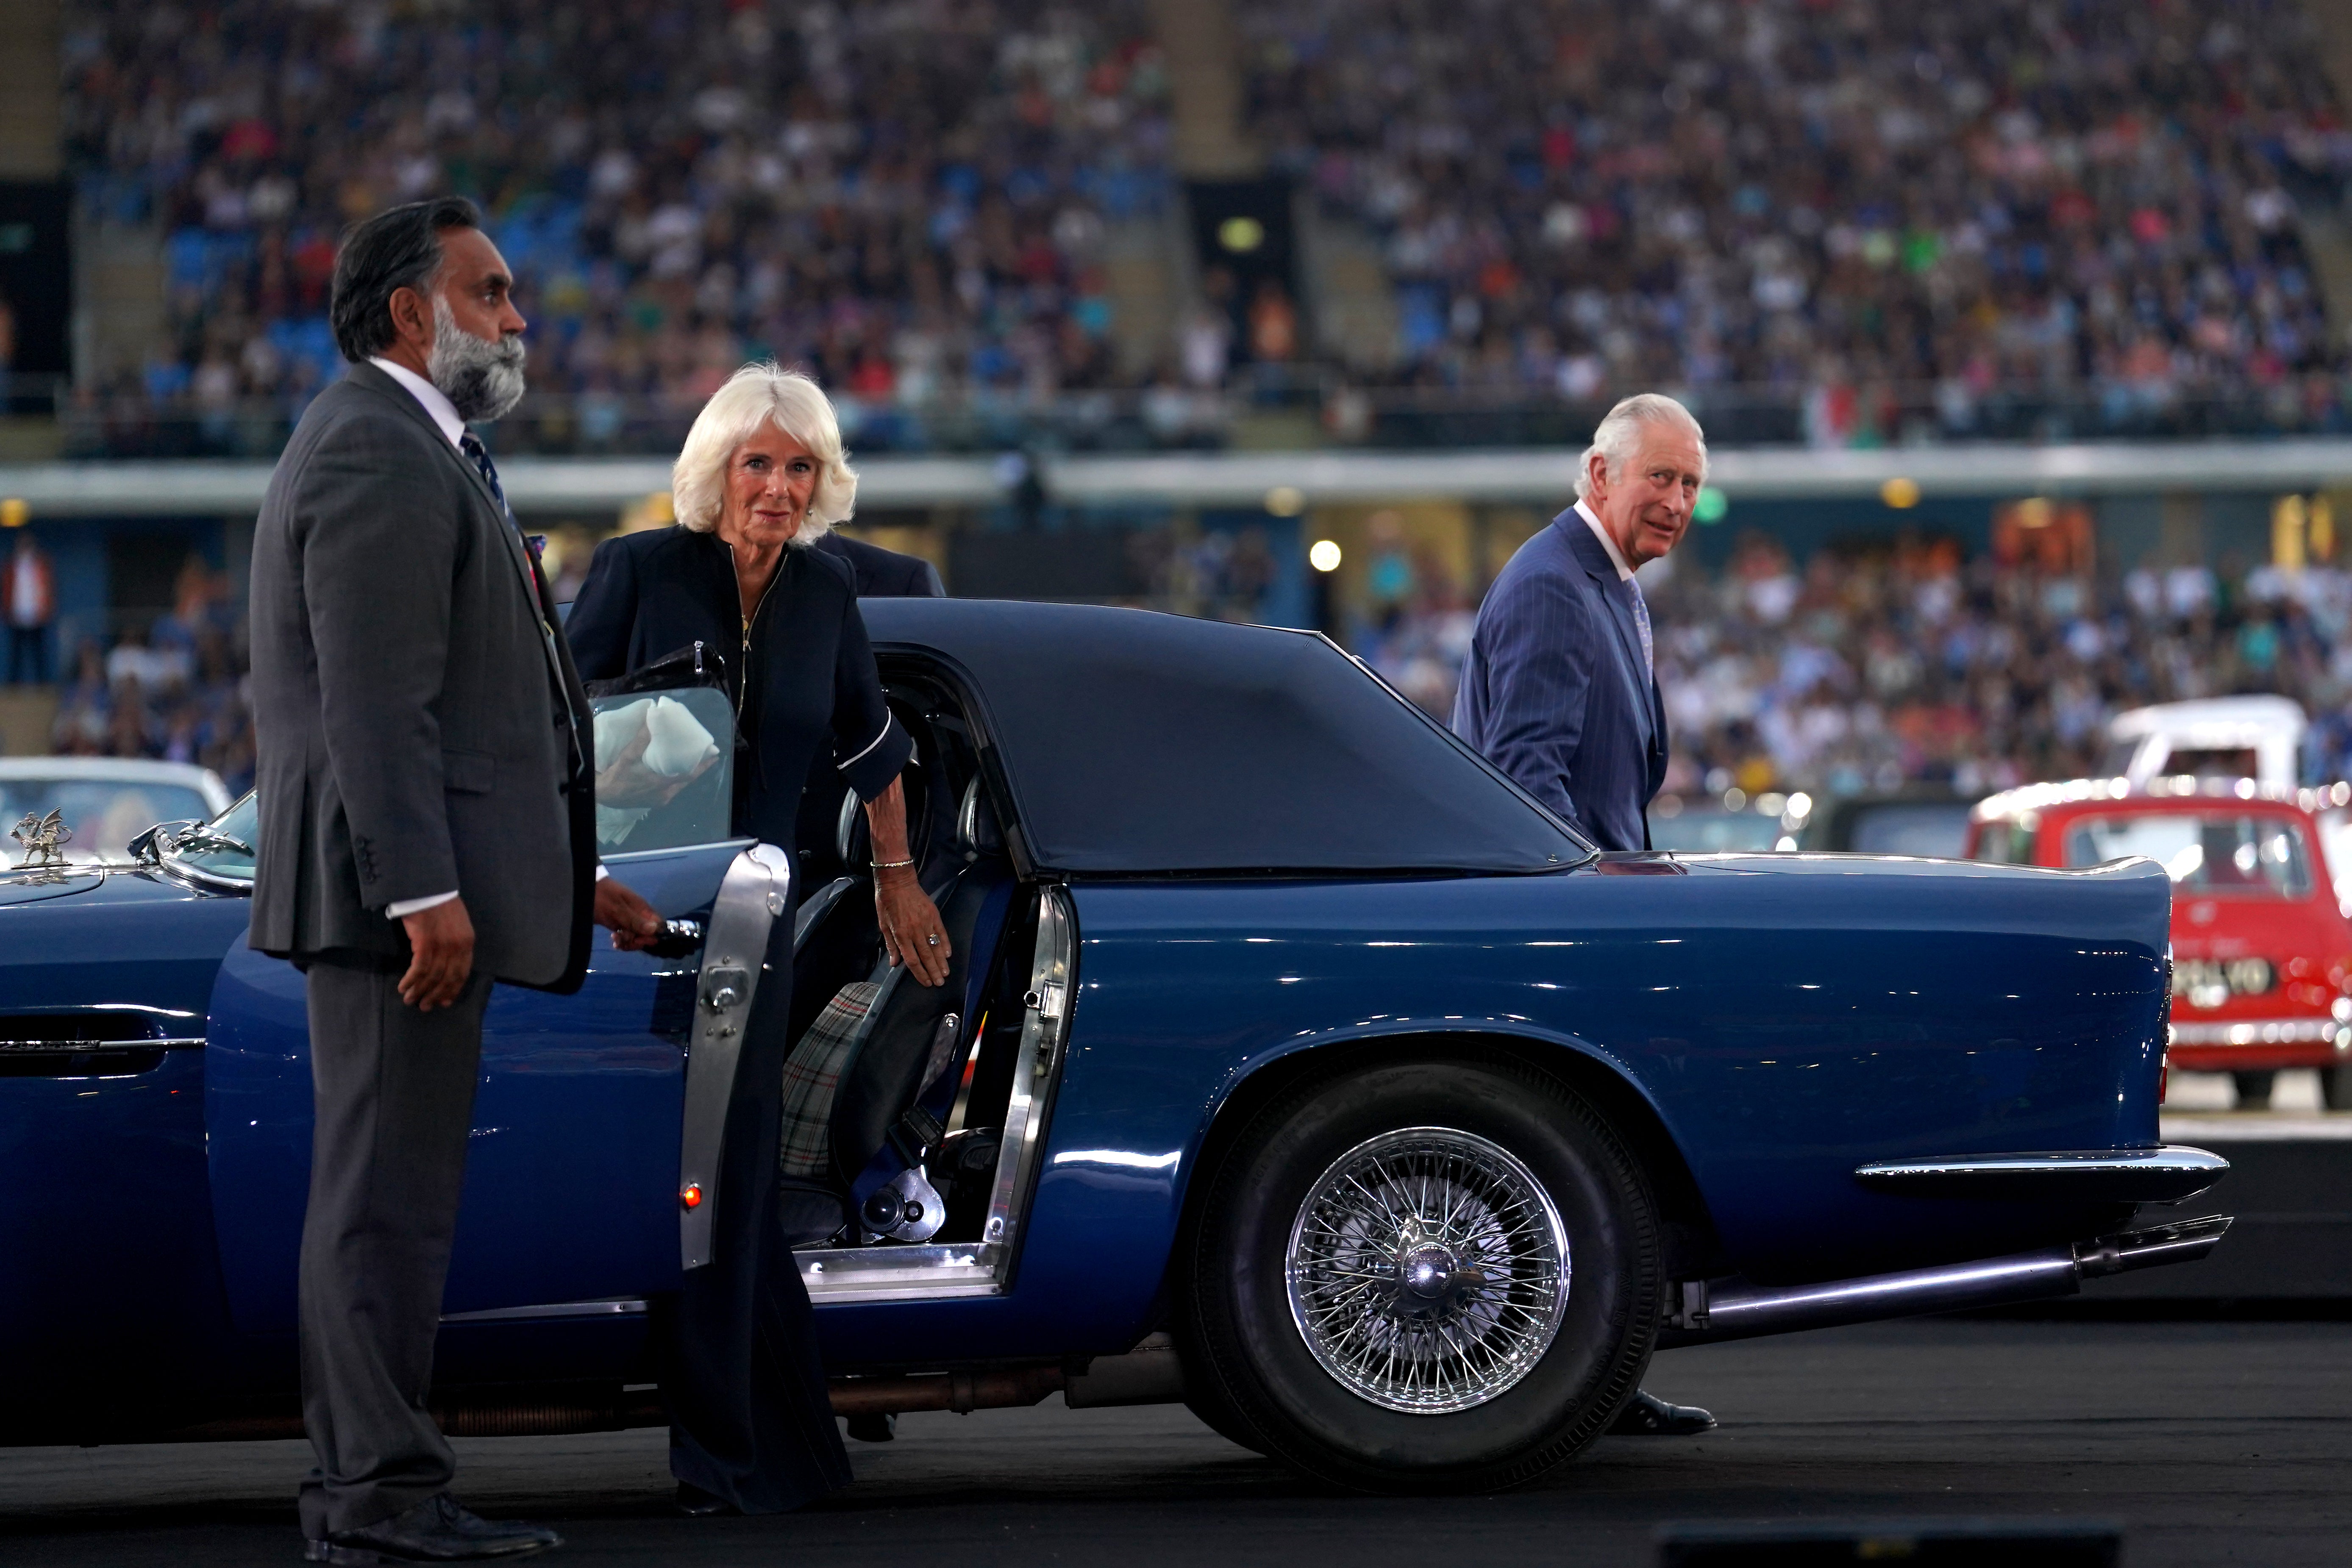 The Prince of Wales and the Duchess of Cornwall arrive in an Aston Martin during the opening ceremony (David Davies/PA)